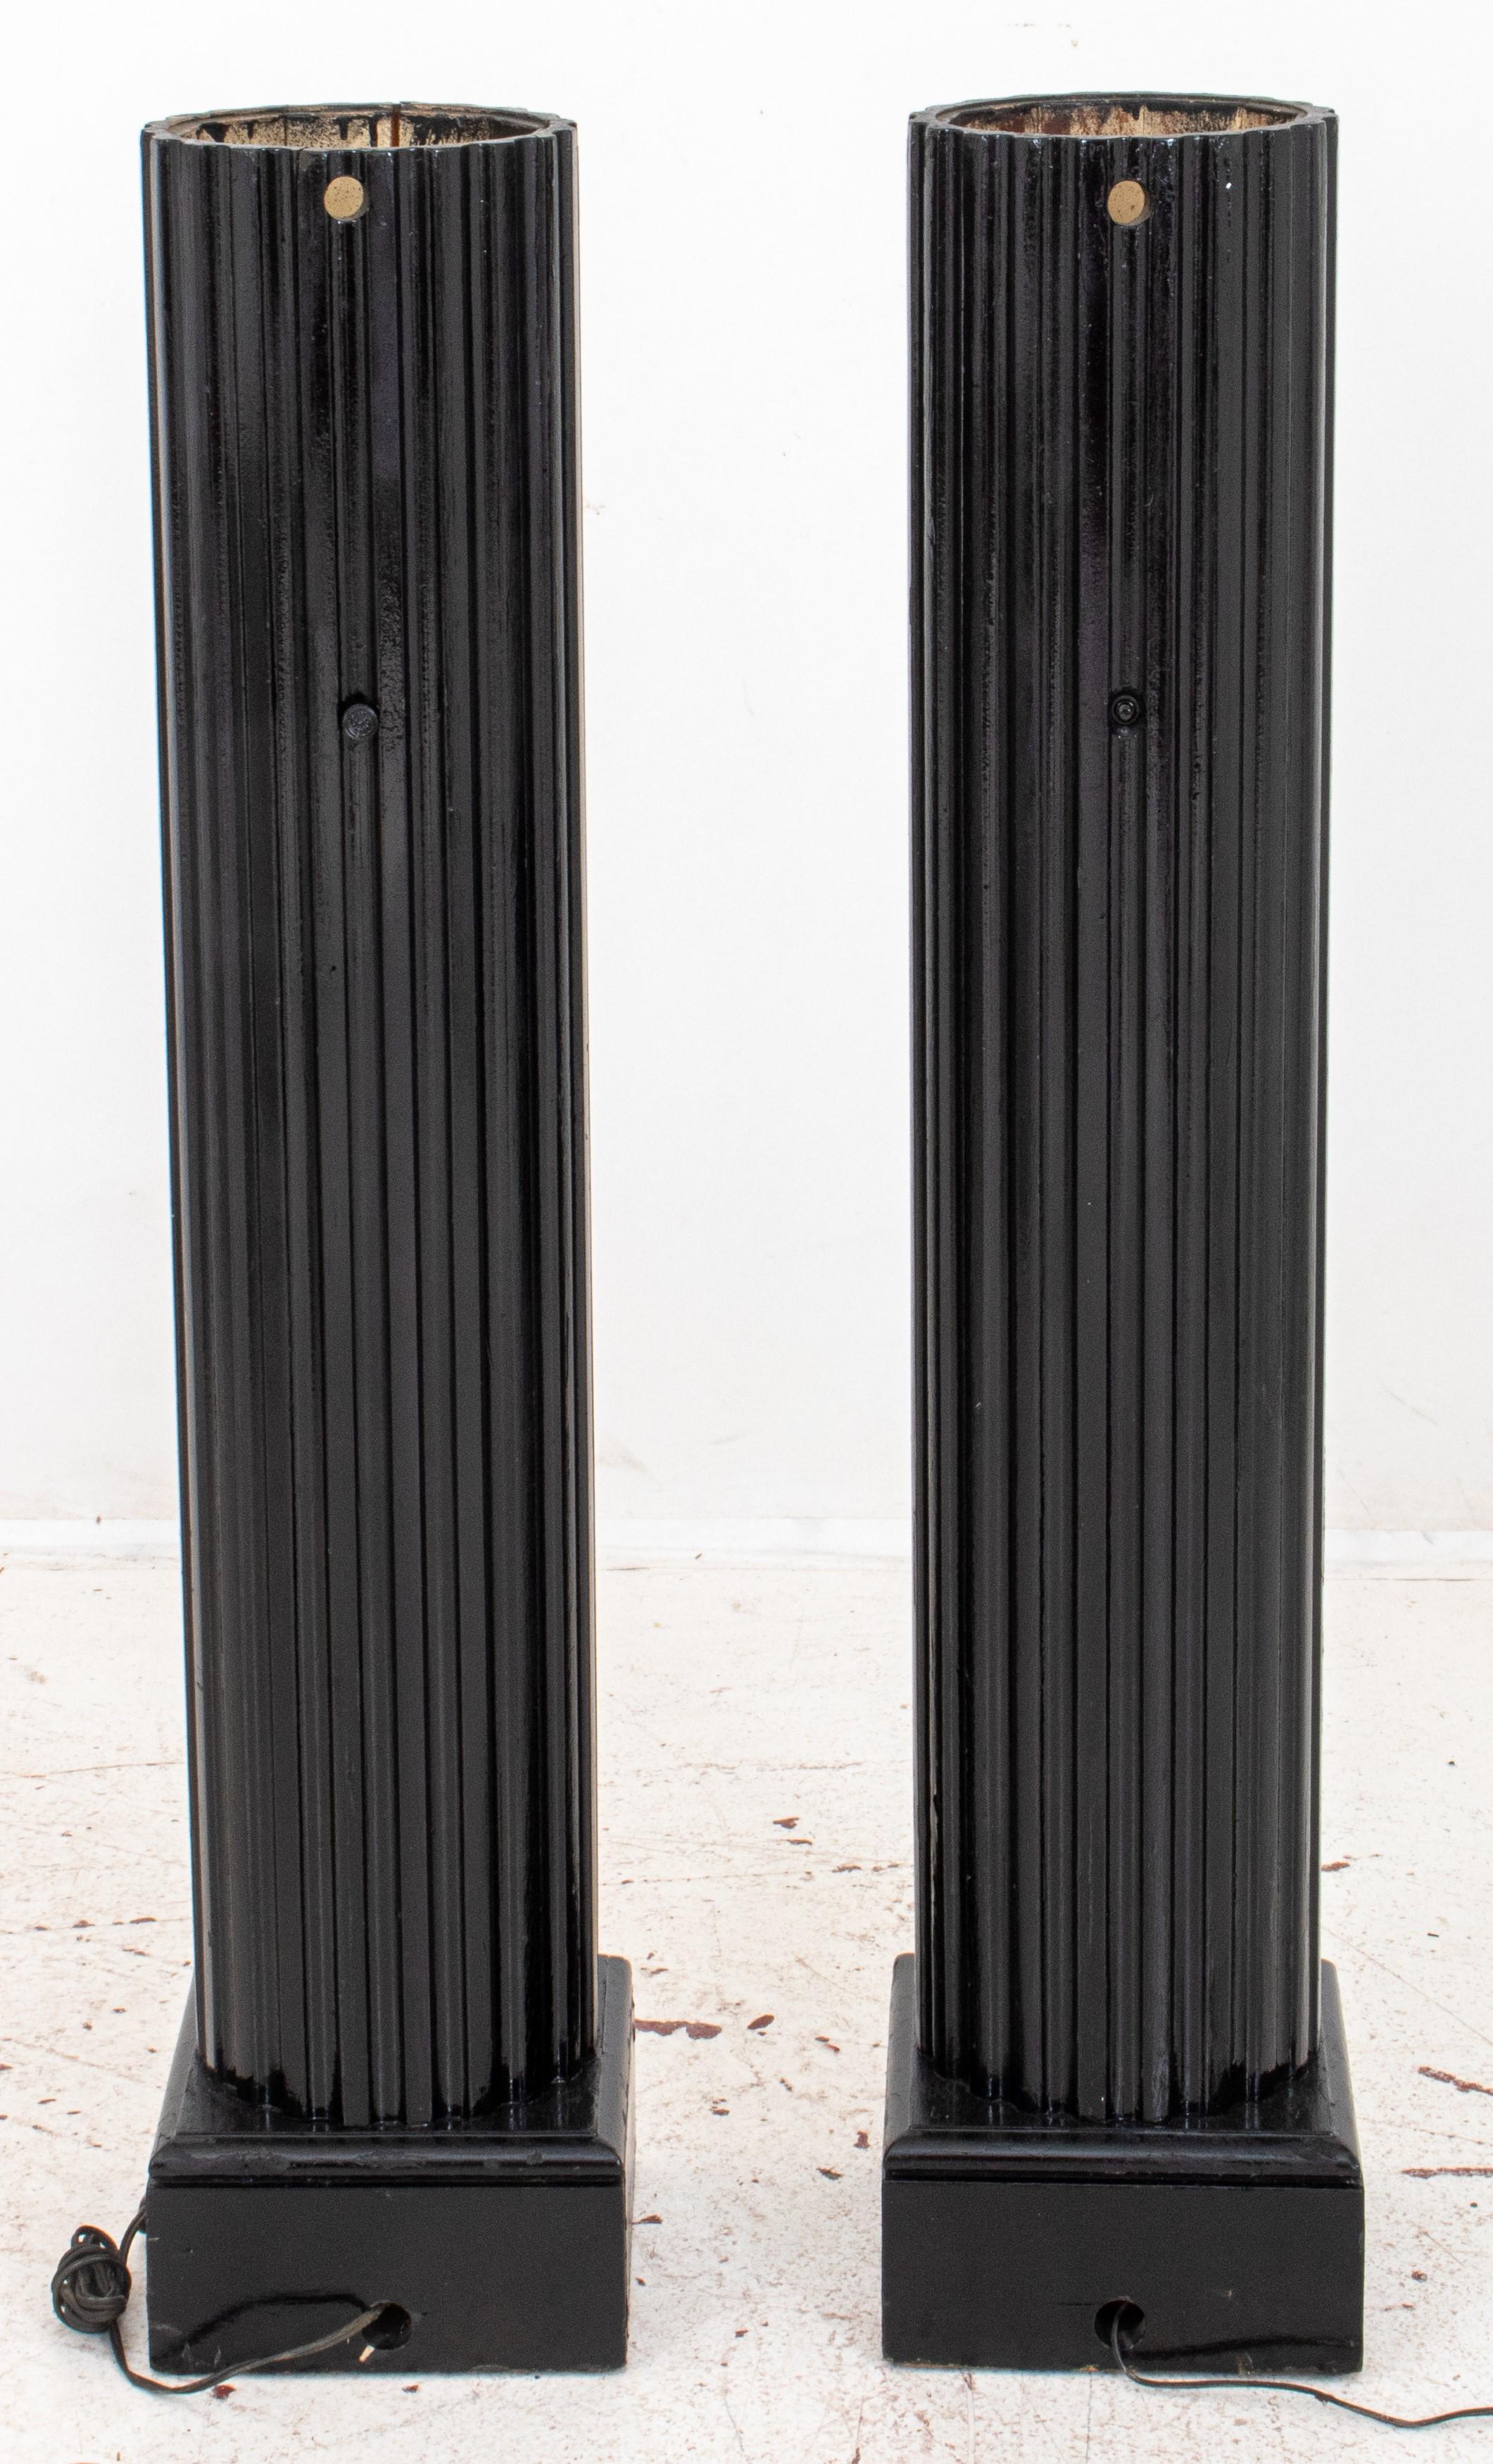 neoclassical ebonized fluted wood pedestal column lamps. Here are the details:

Style: Neoclassical
Material: Ebonized fluted wood
Features:
Pedestal column design
Original 